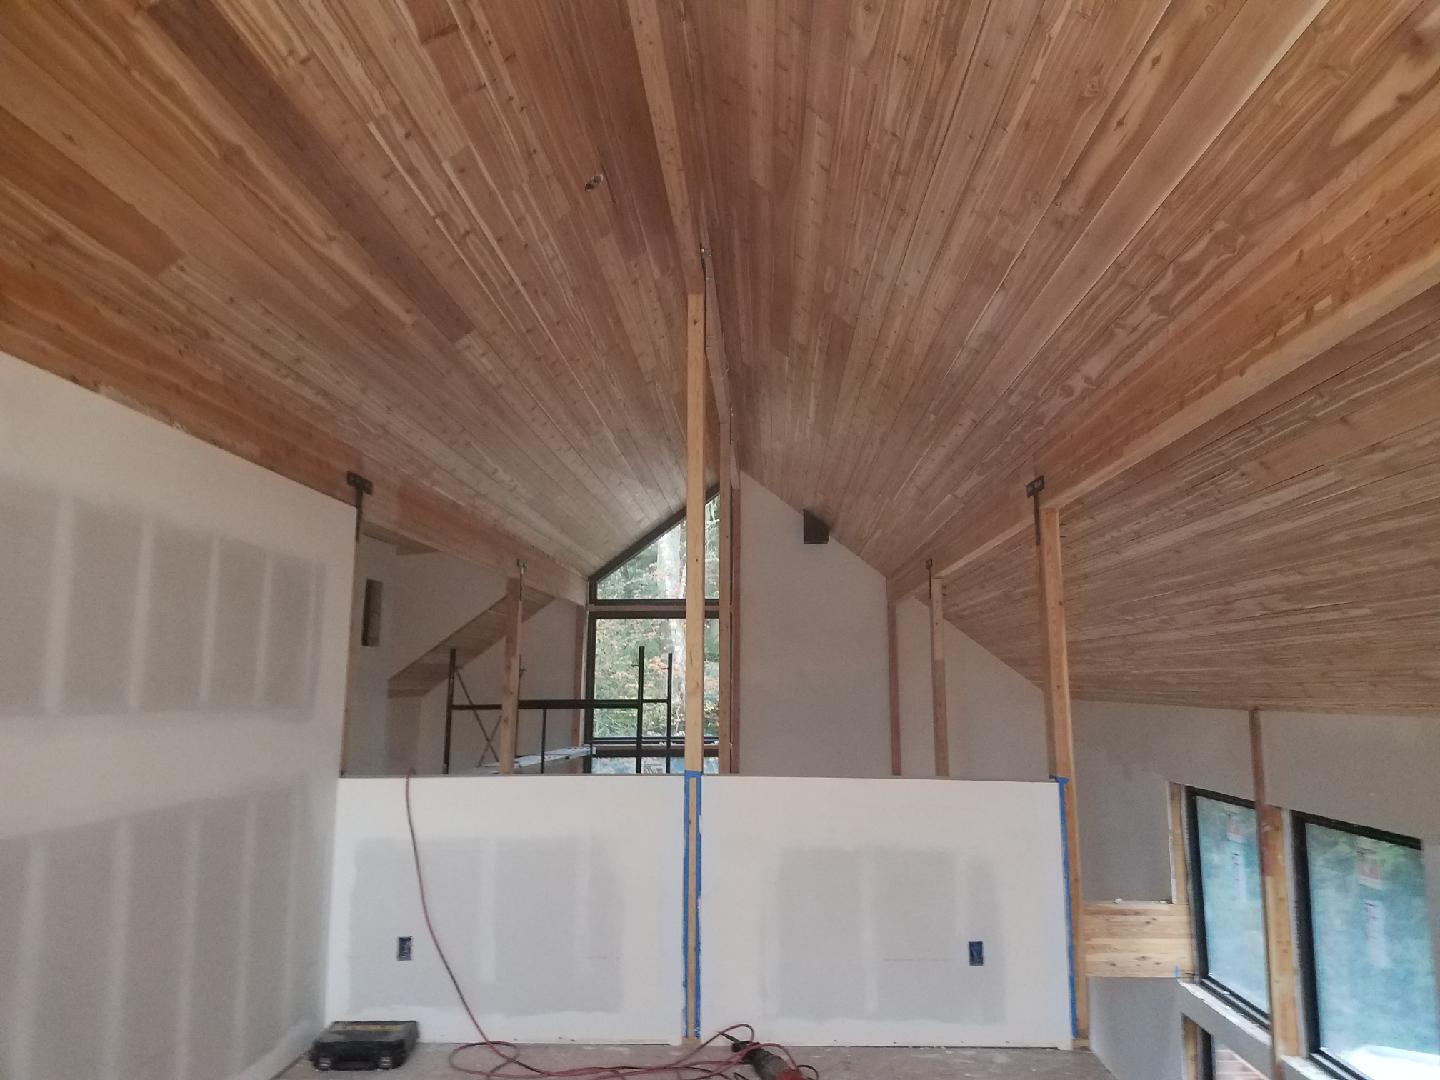 Beautifully finished Lindal tongue and groove cedar lines the roof, and radiates warmth,  Shown here from the master bedroom